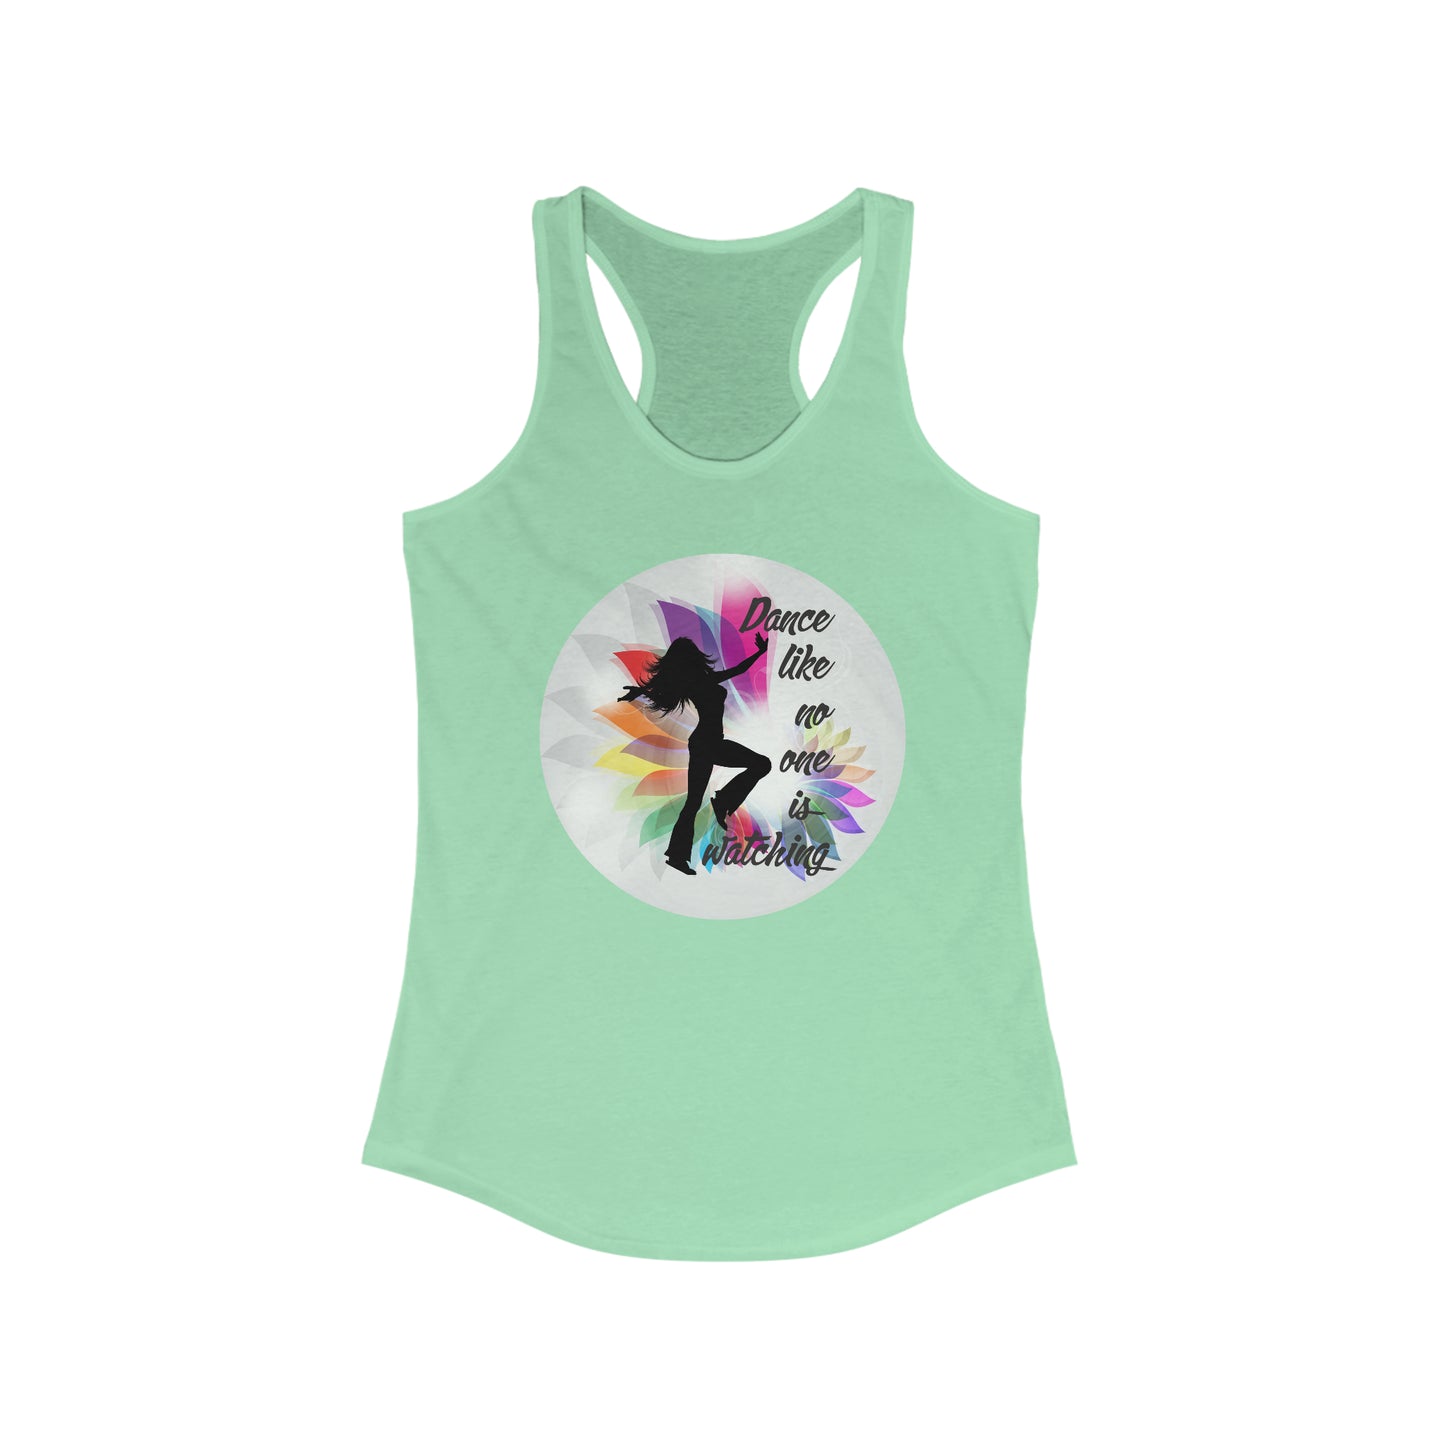 Dancer Tank Top For Woman Top For Dancing Tank Top For Hip Hop Dancer Shirt For Contemporary Dance Shirt For Dancer Gift